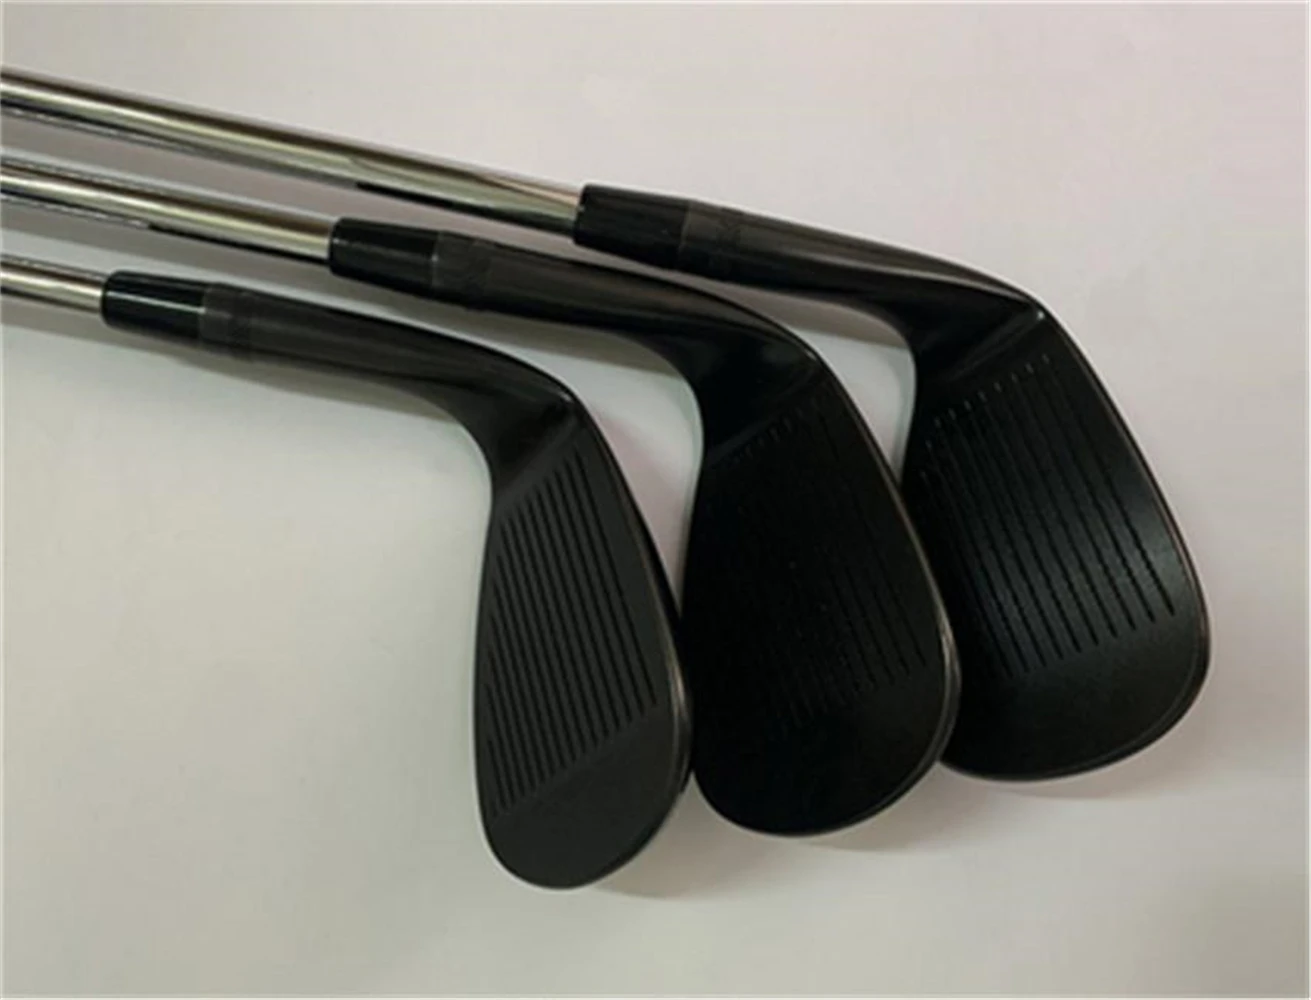 

3PC R-T-X-4 Black Golf Wedges Clubs Golf 48/50/52/54/56/58/60/62 R/S Steel Shafts Headcovers Fast Free Shipping